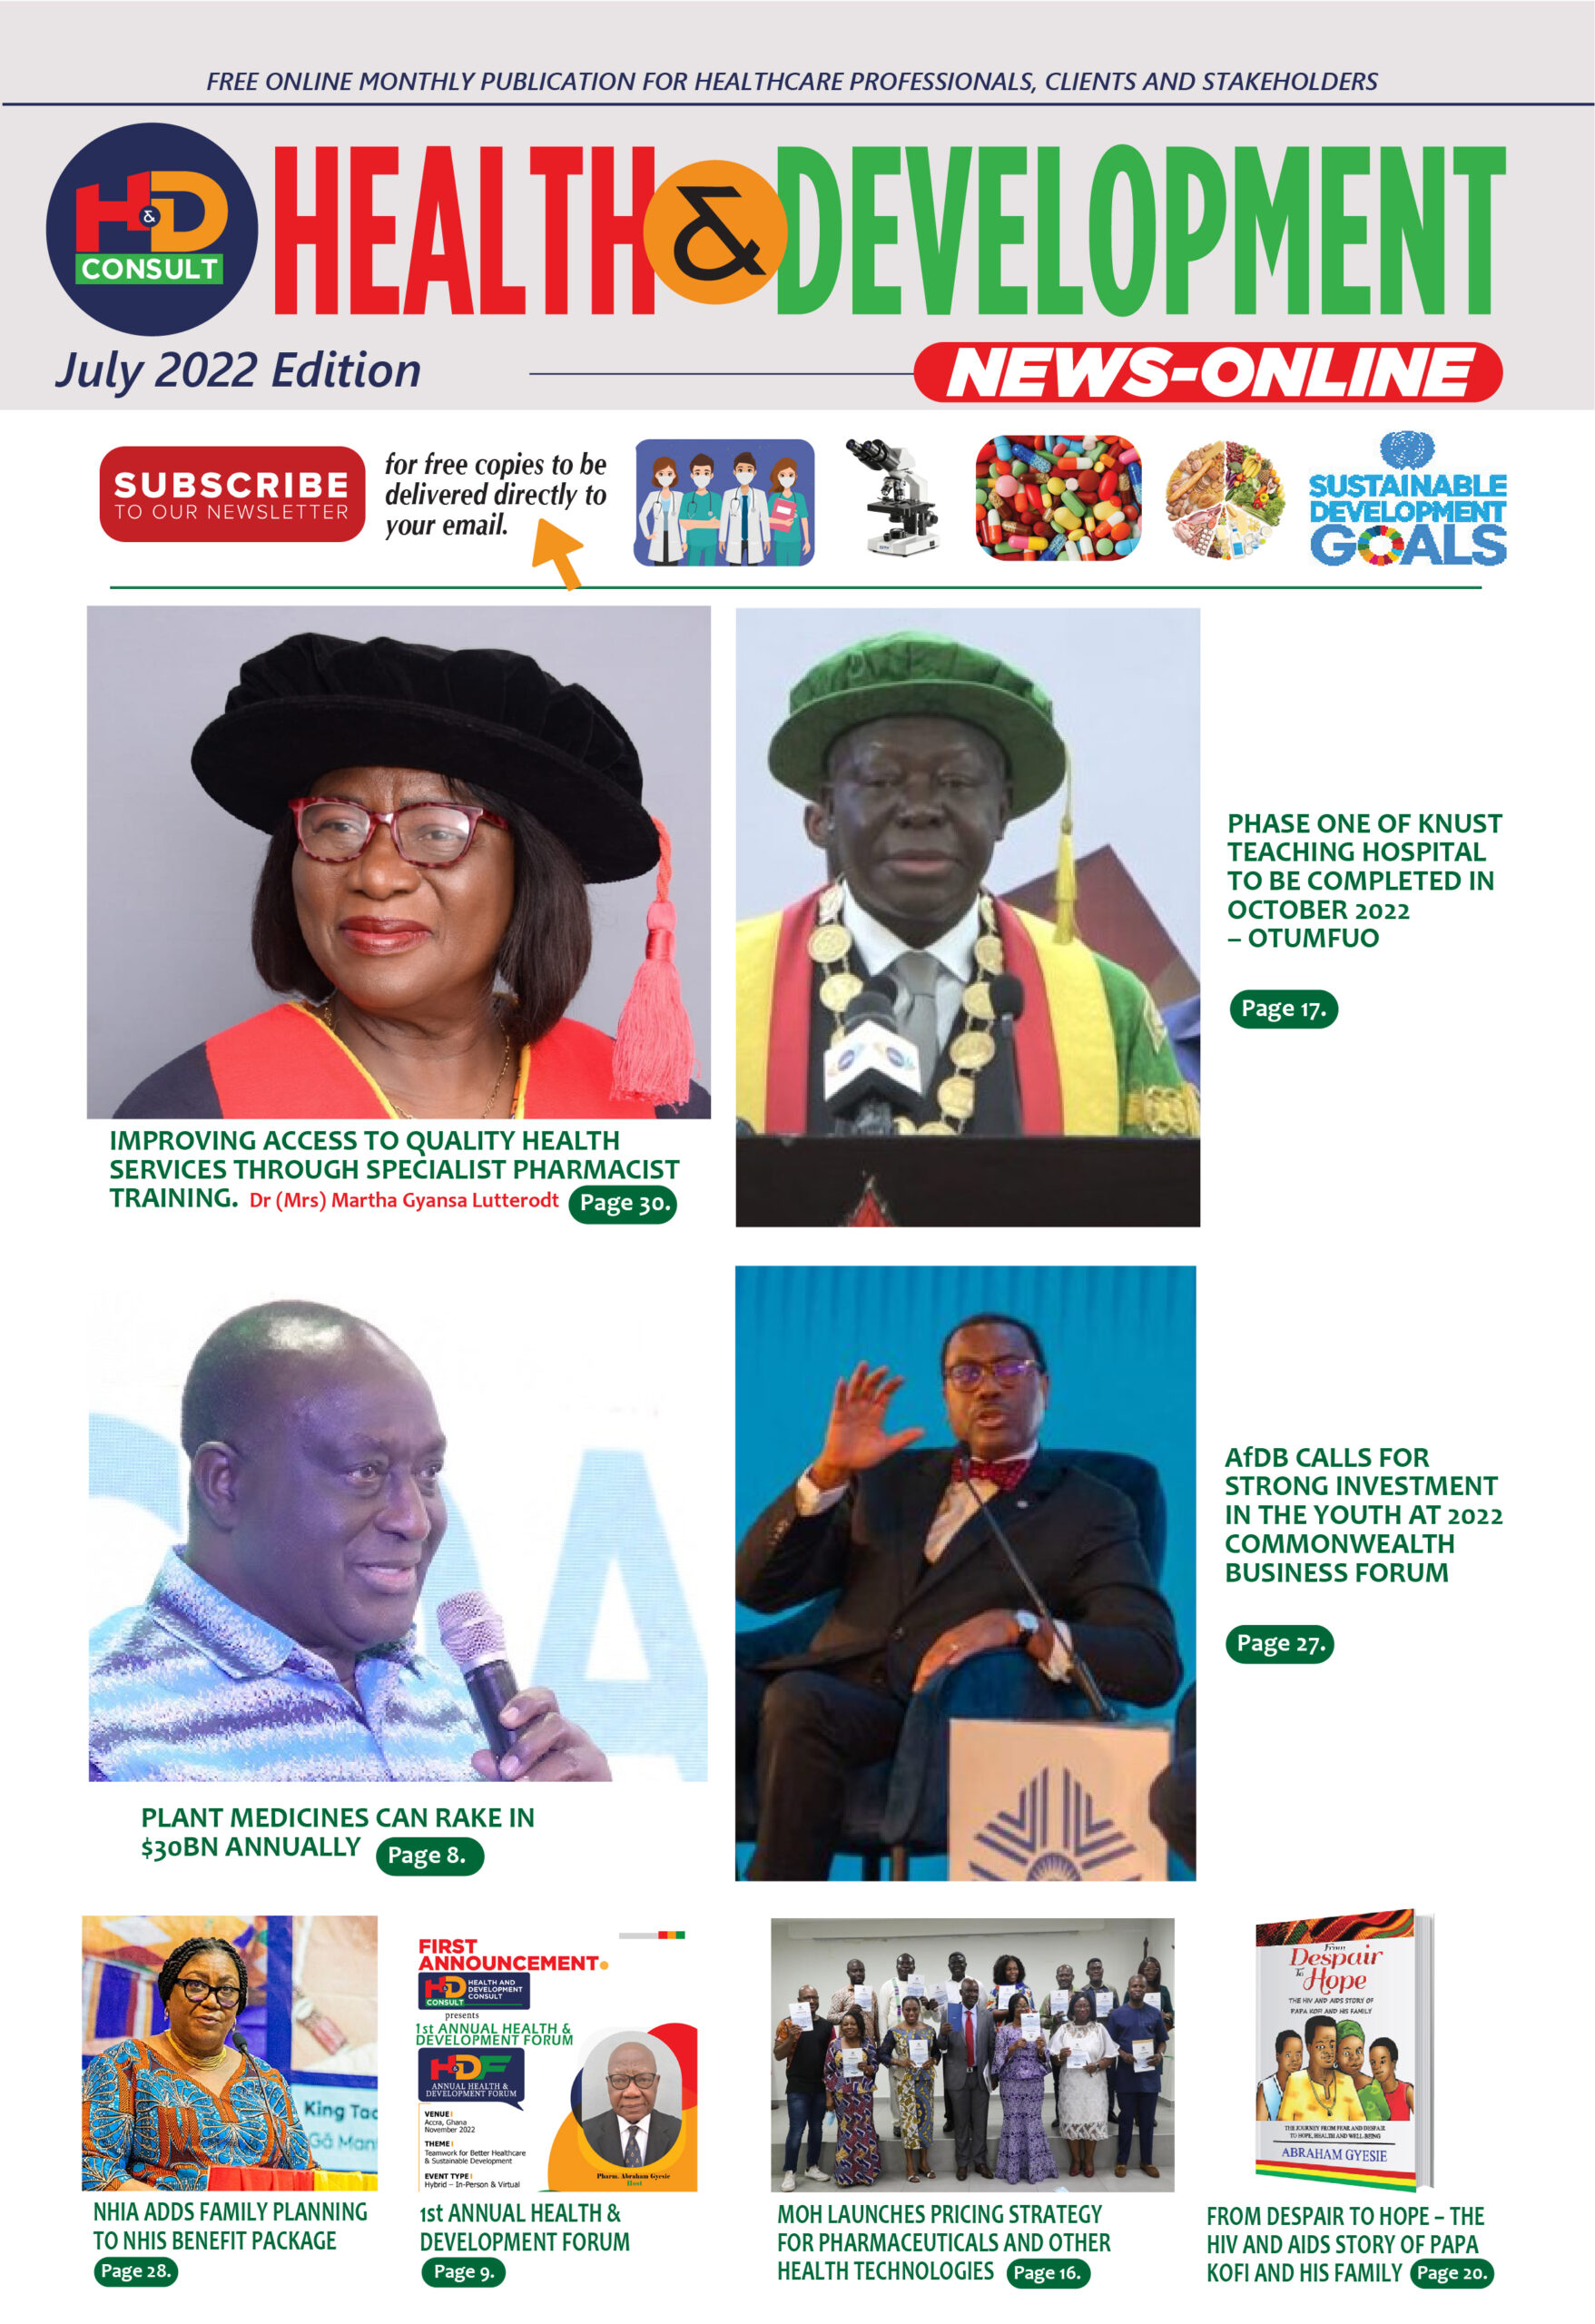 HEALTH AND DEVELOPMENT NEWS-ONLINE JULY 2022 EDITION-01